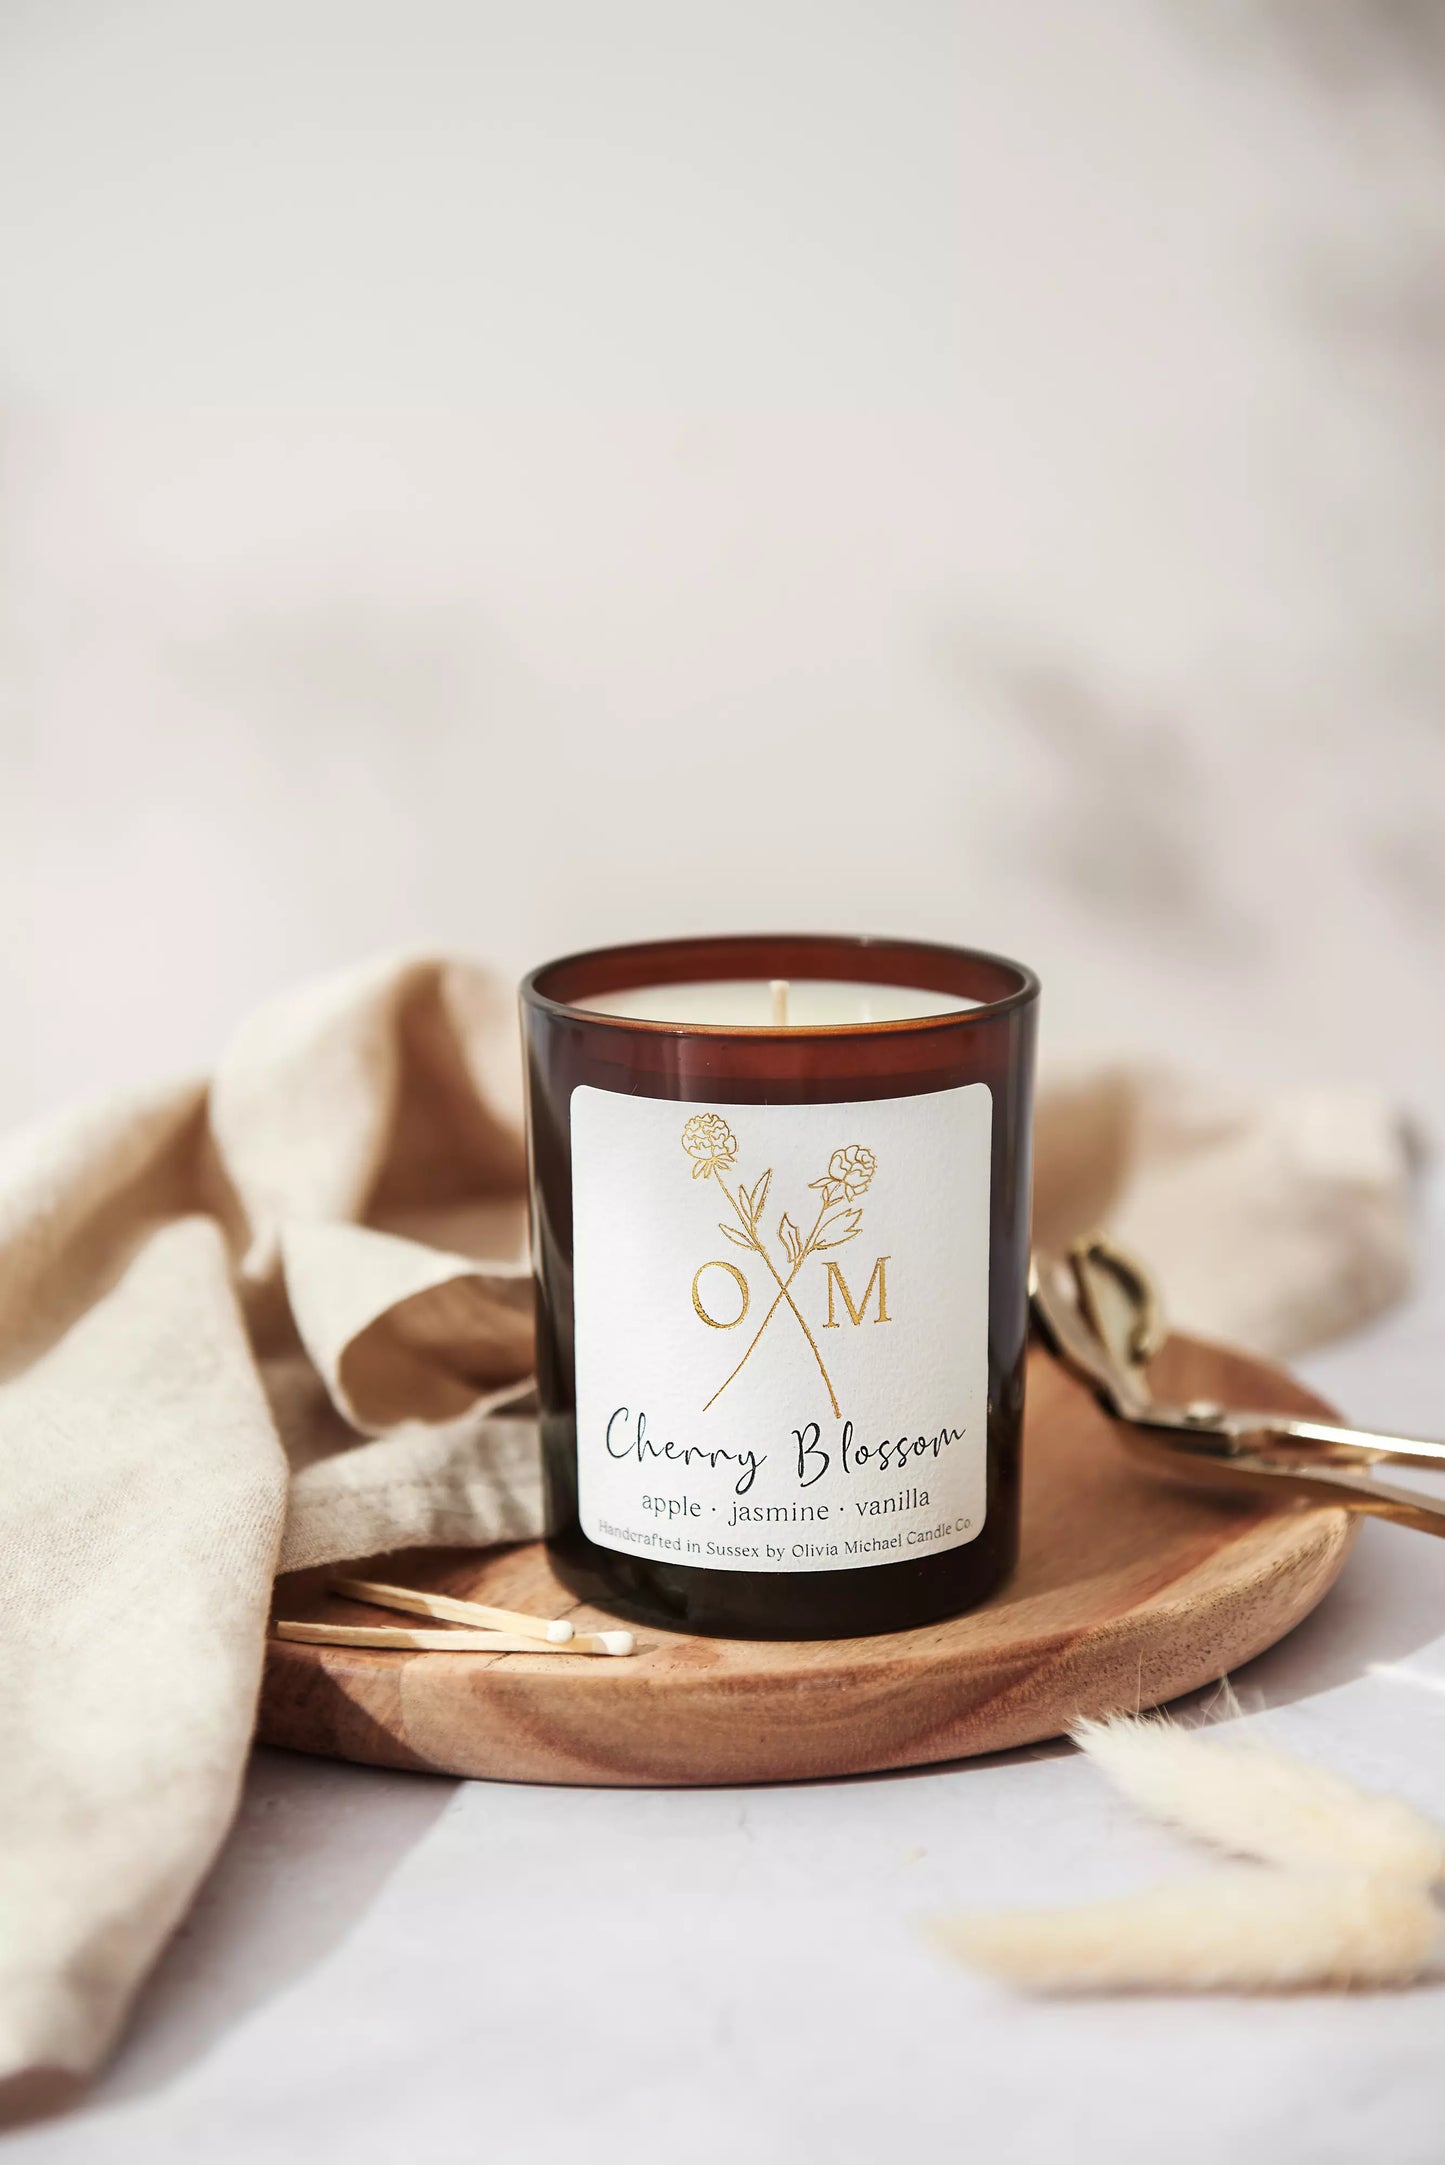 Our apple and vanilla scented candle is on display in an amber glass jar.